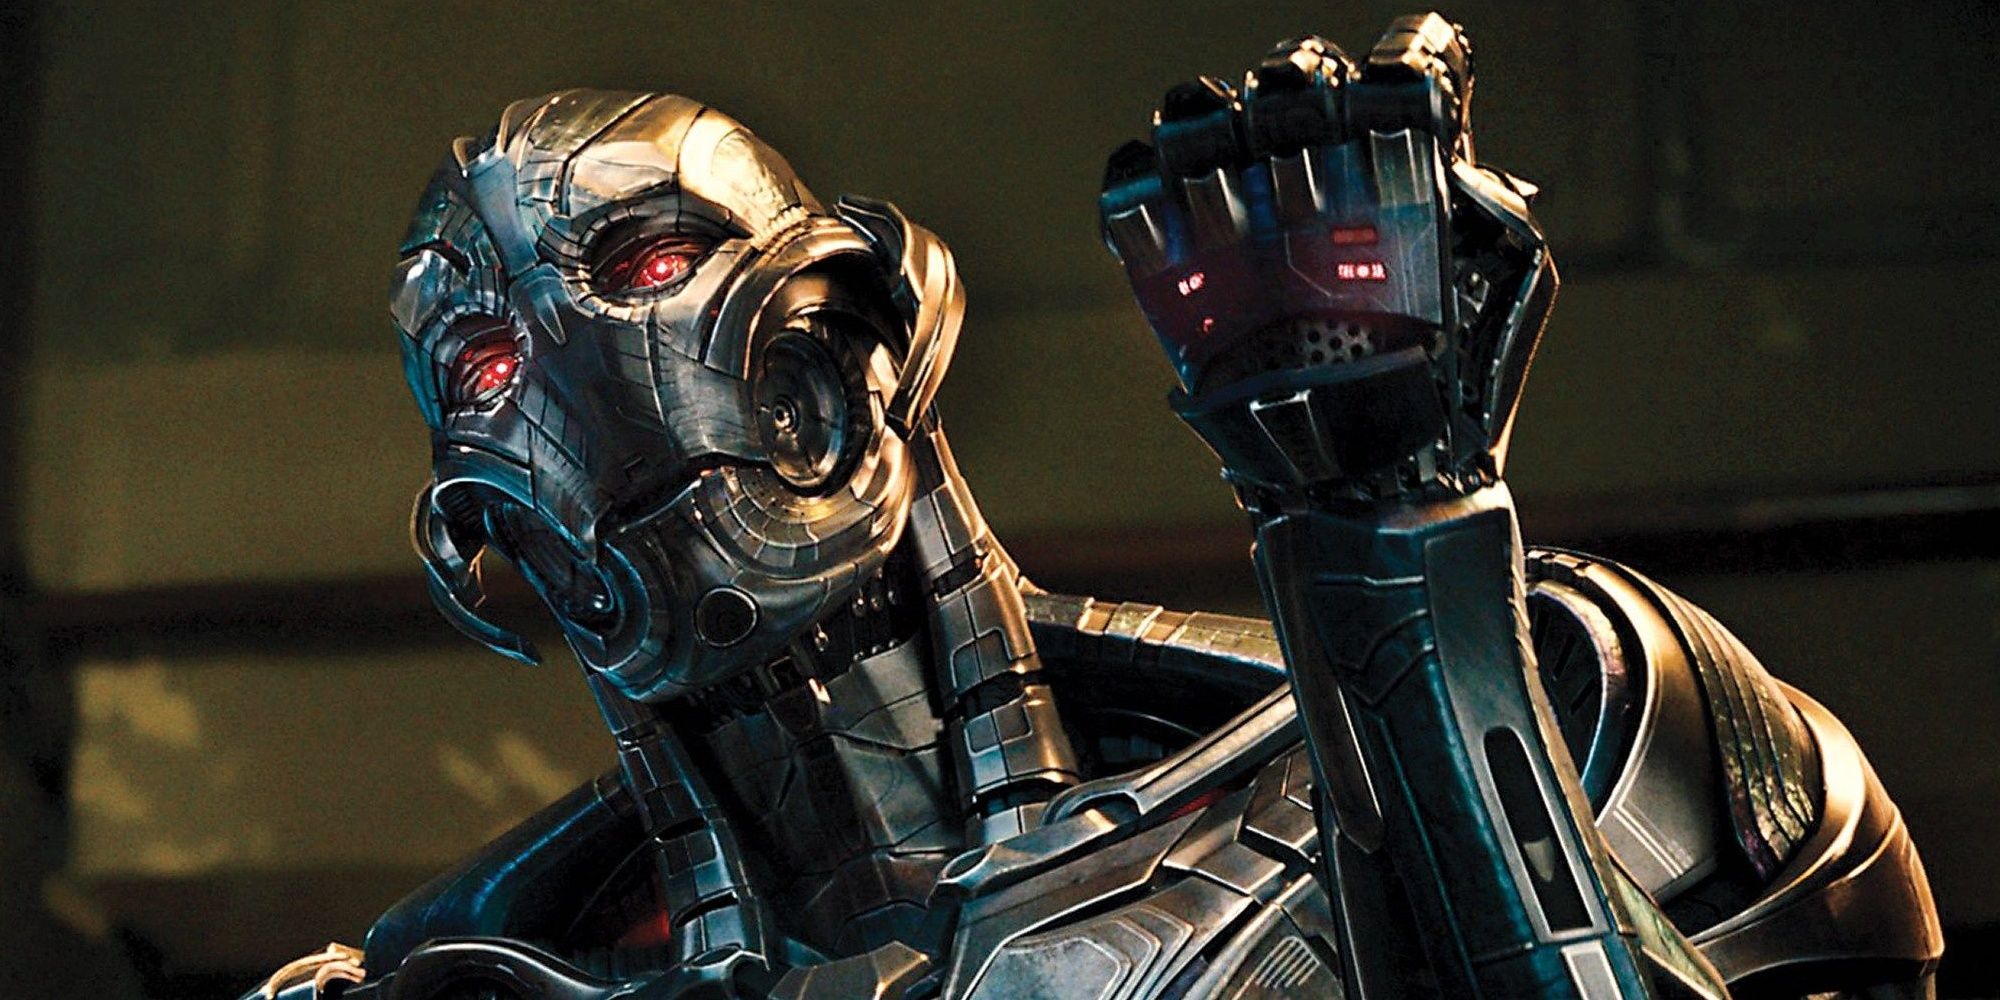 Ultron from Avengers Age of Ultron